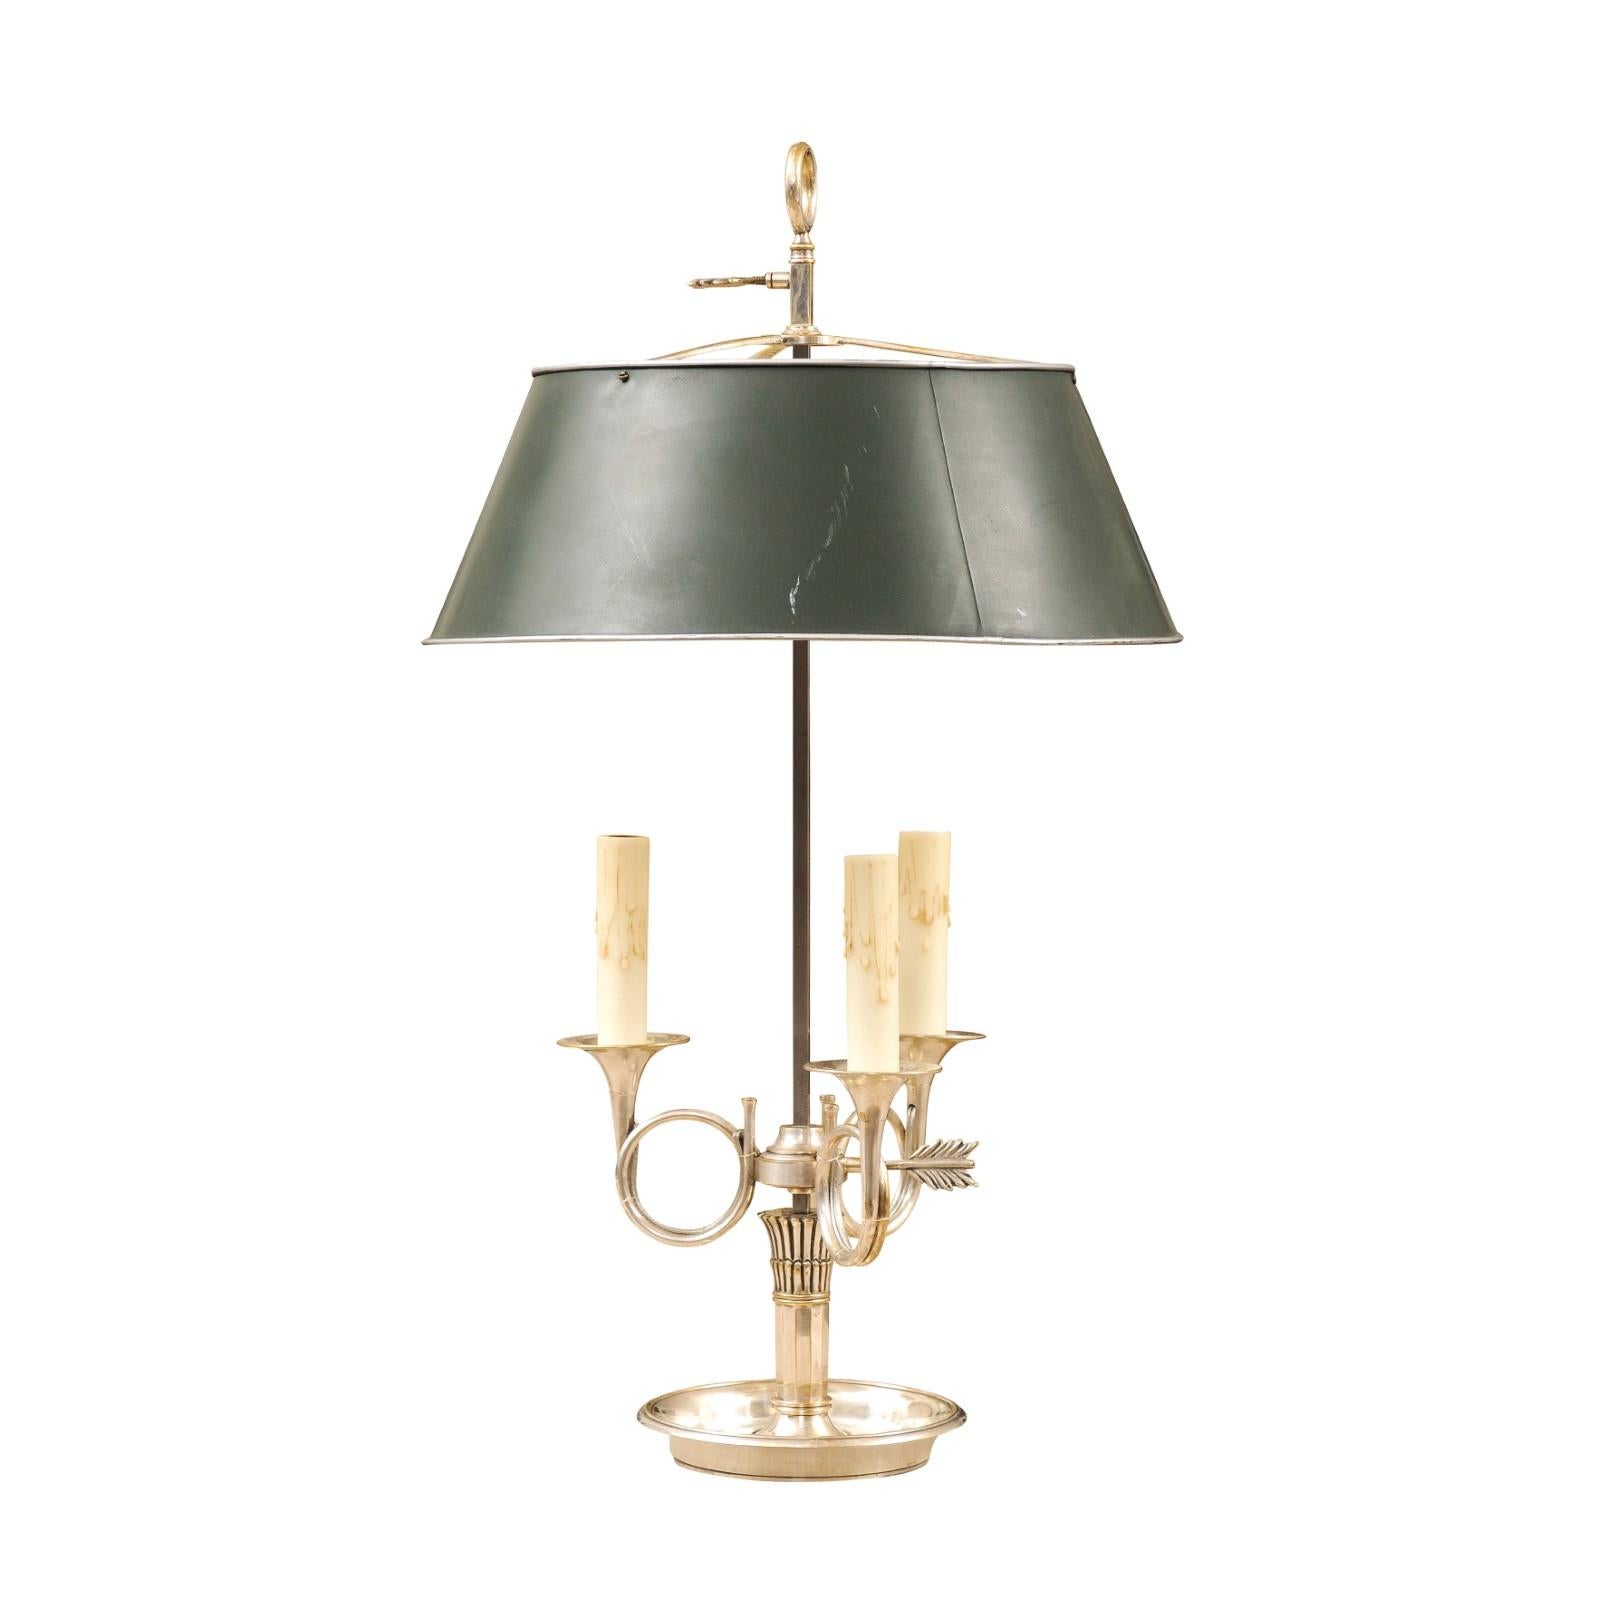 A Turn of the Century silvered bronze three-light bouillotte table lamp from the early 20th century with French hunting horn-themed arms and green painted sheet metal shade. Created in France during the Turn of the Century which saw the transition